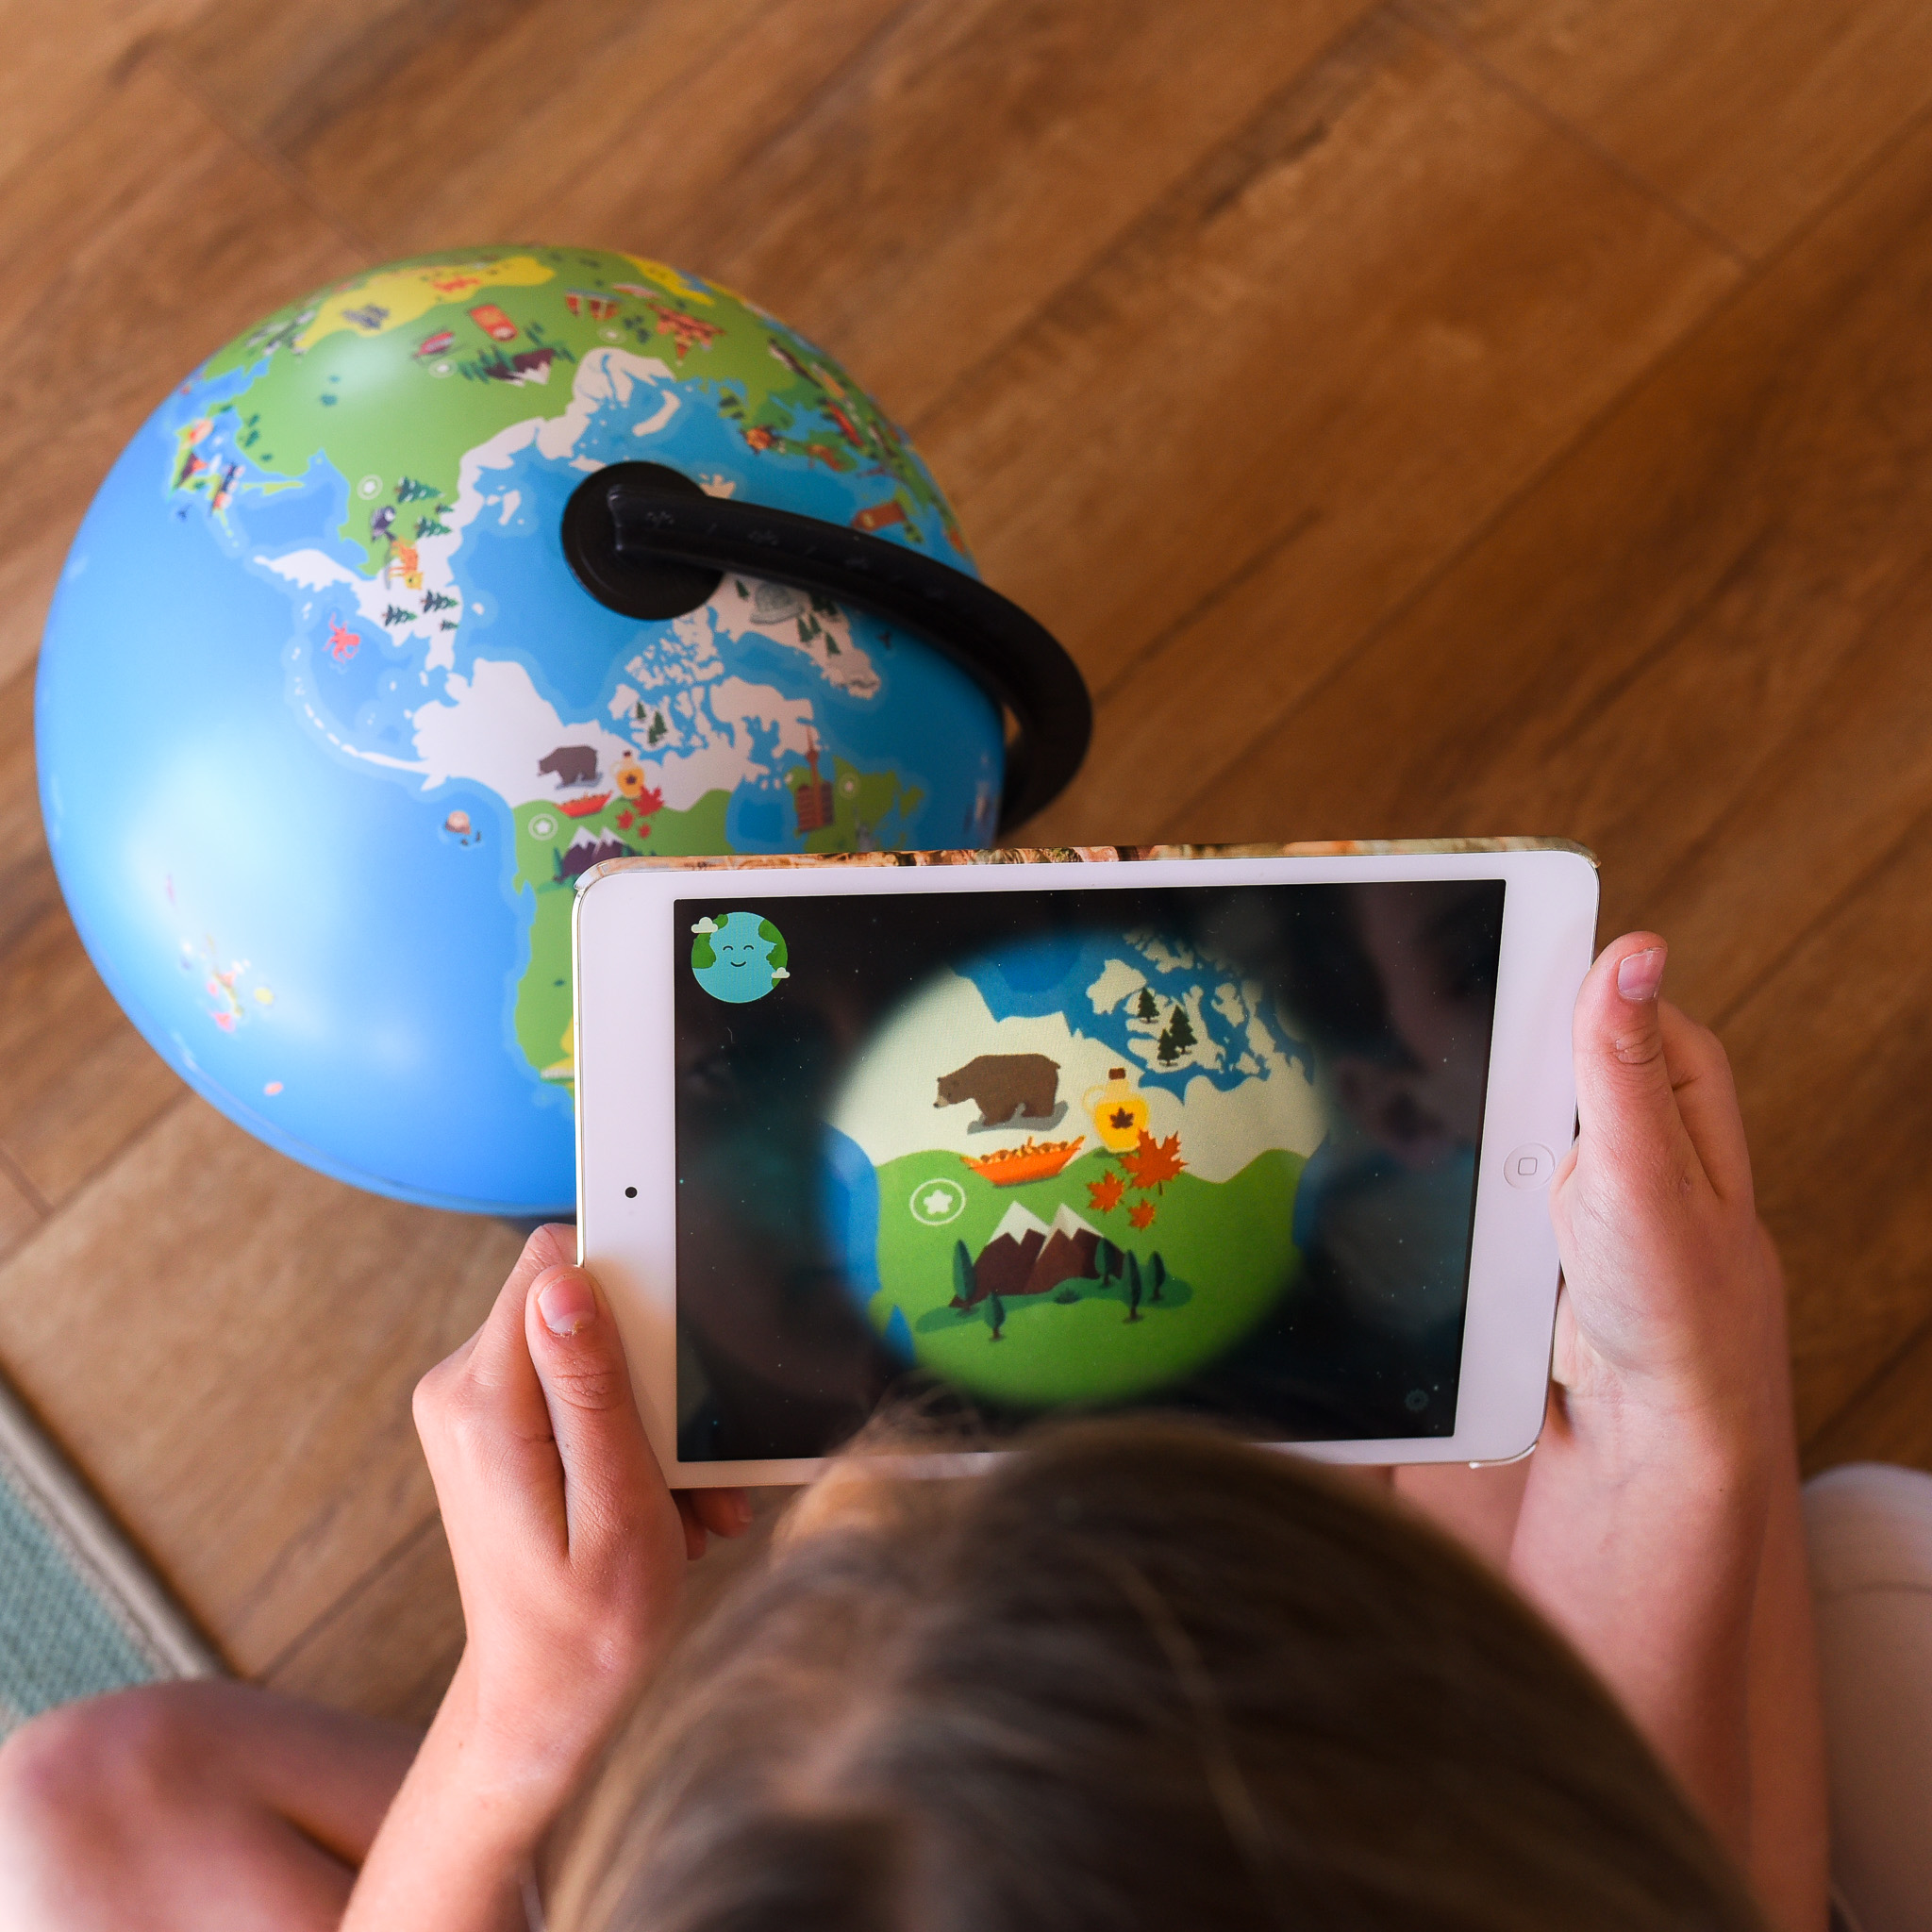 Orboot review - image shows a girl holding an ipad learning about animalson the Orboot Interactive Globe